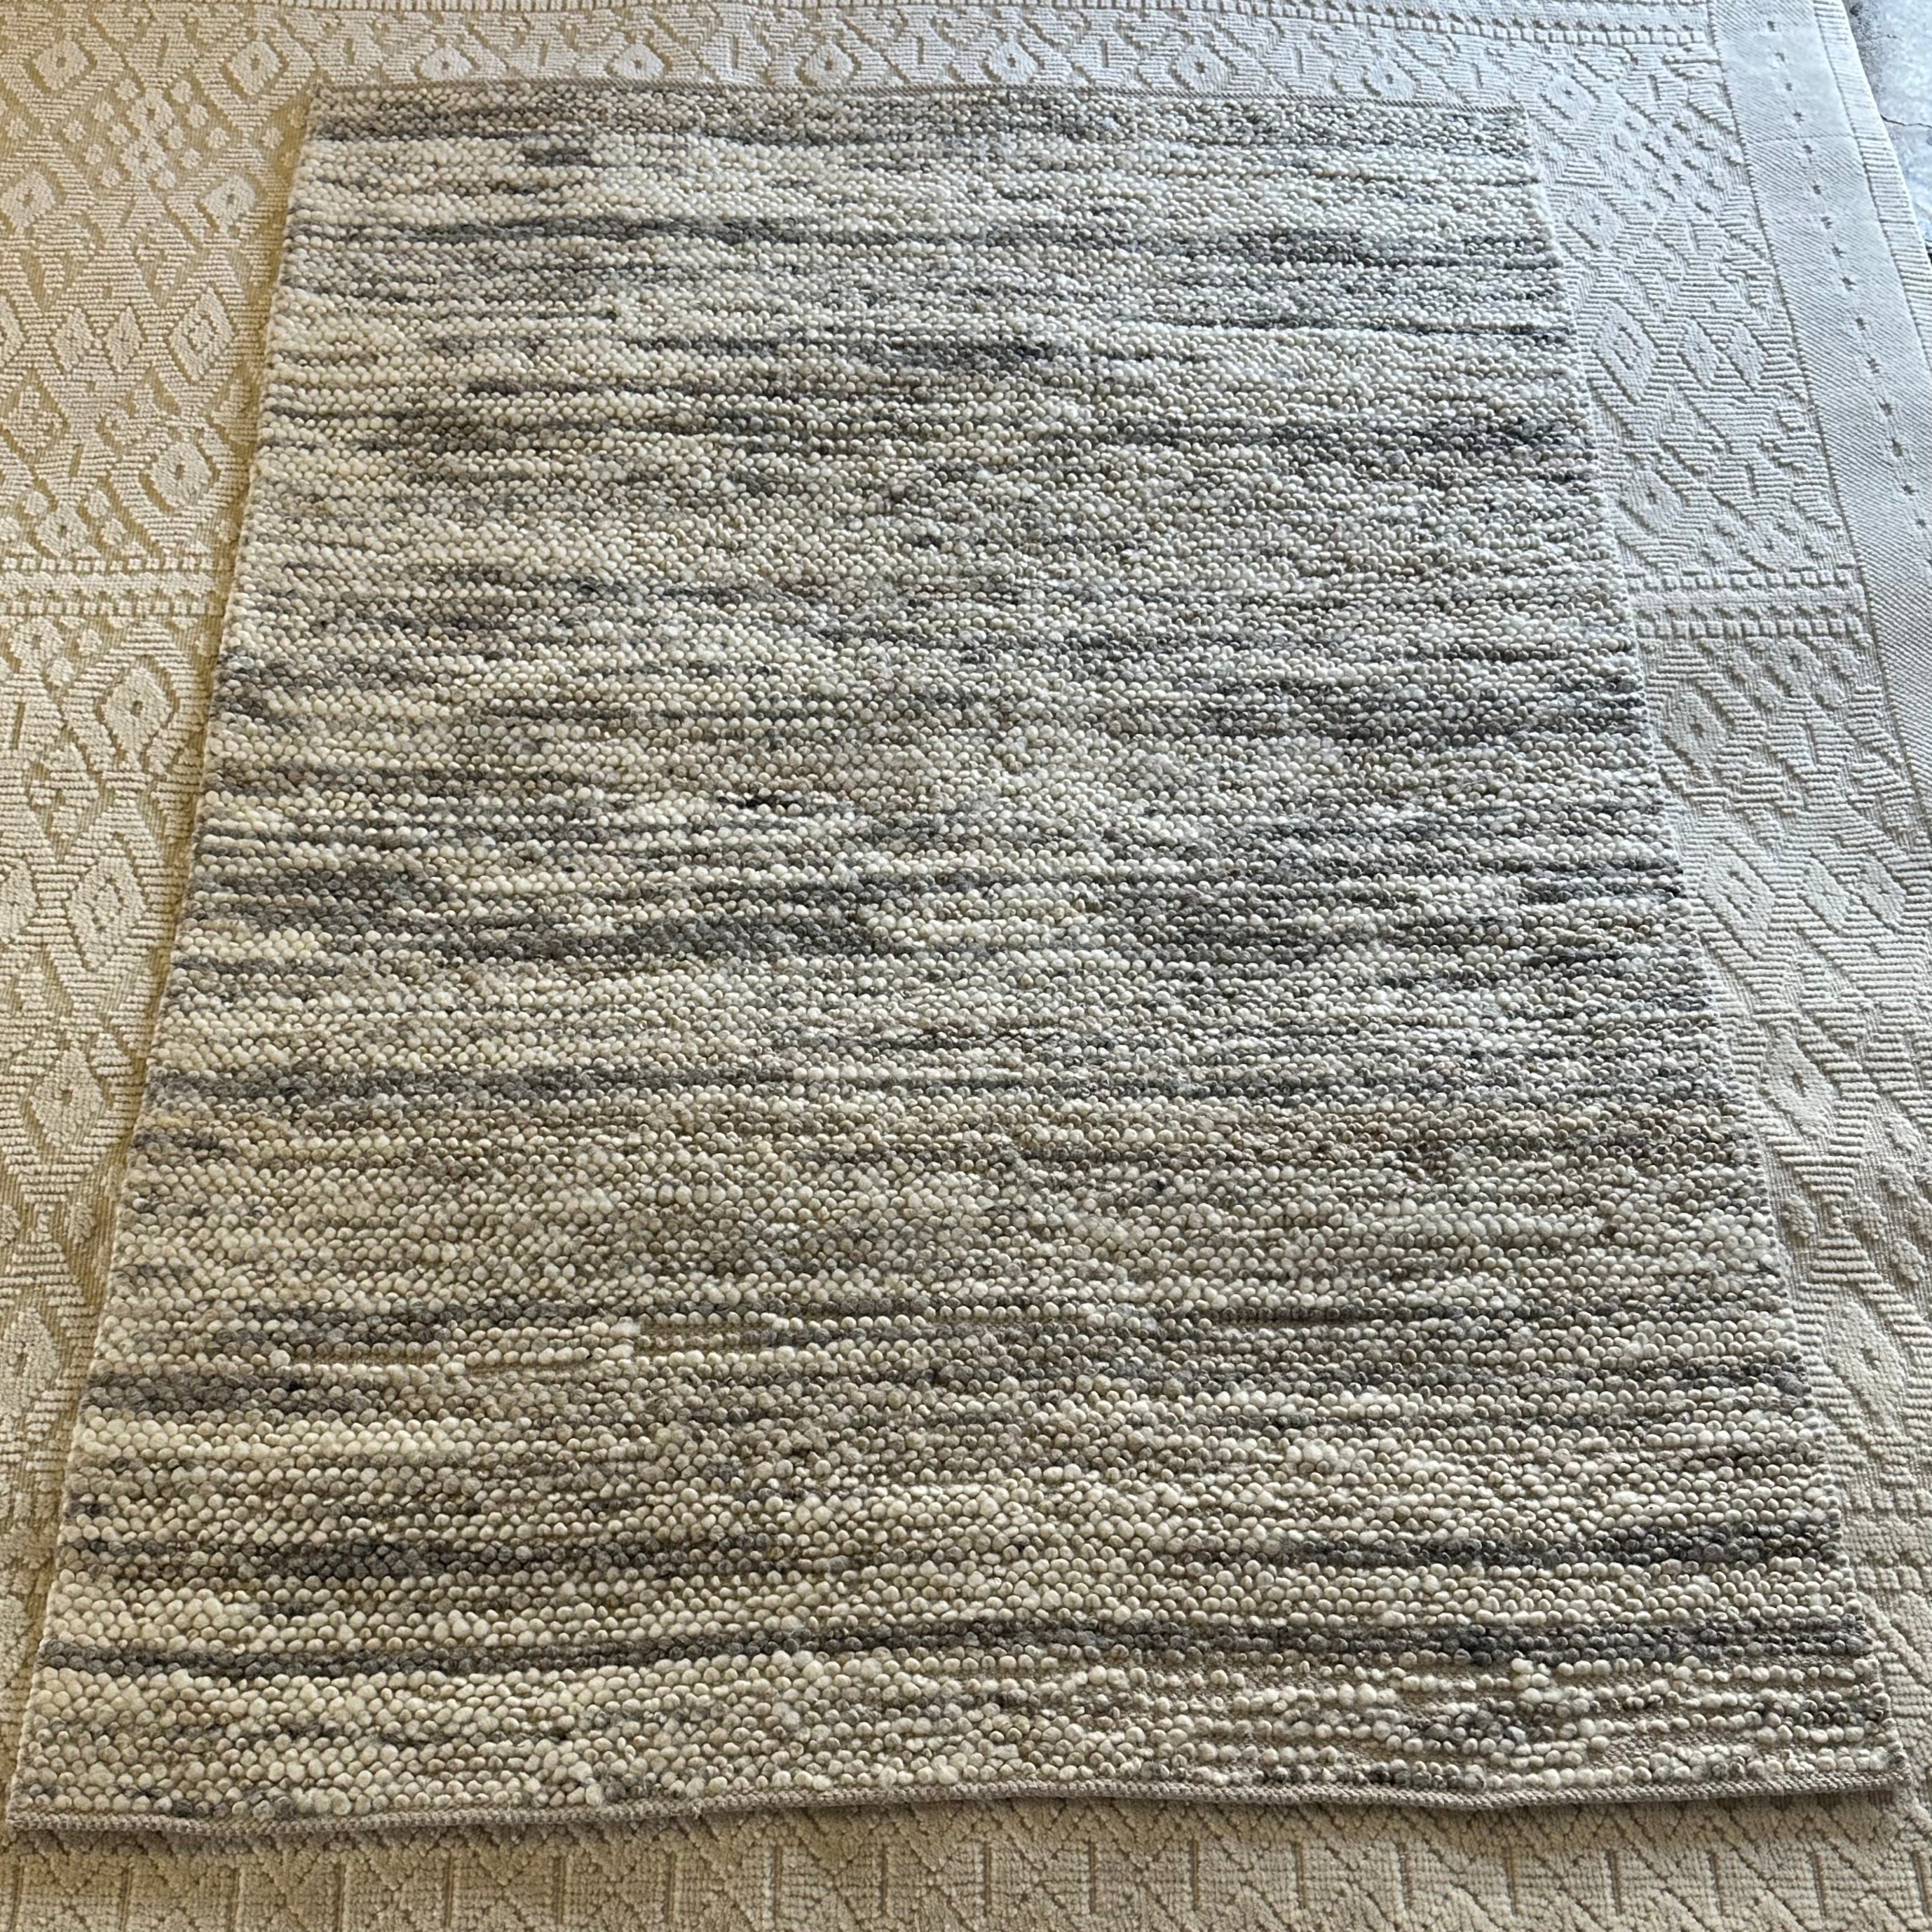 Colley Cibber Handwoven Wool Durrie Natural Grey and White Goti Rug (Multiple Sizes Available)